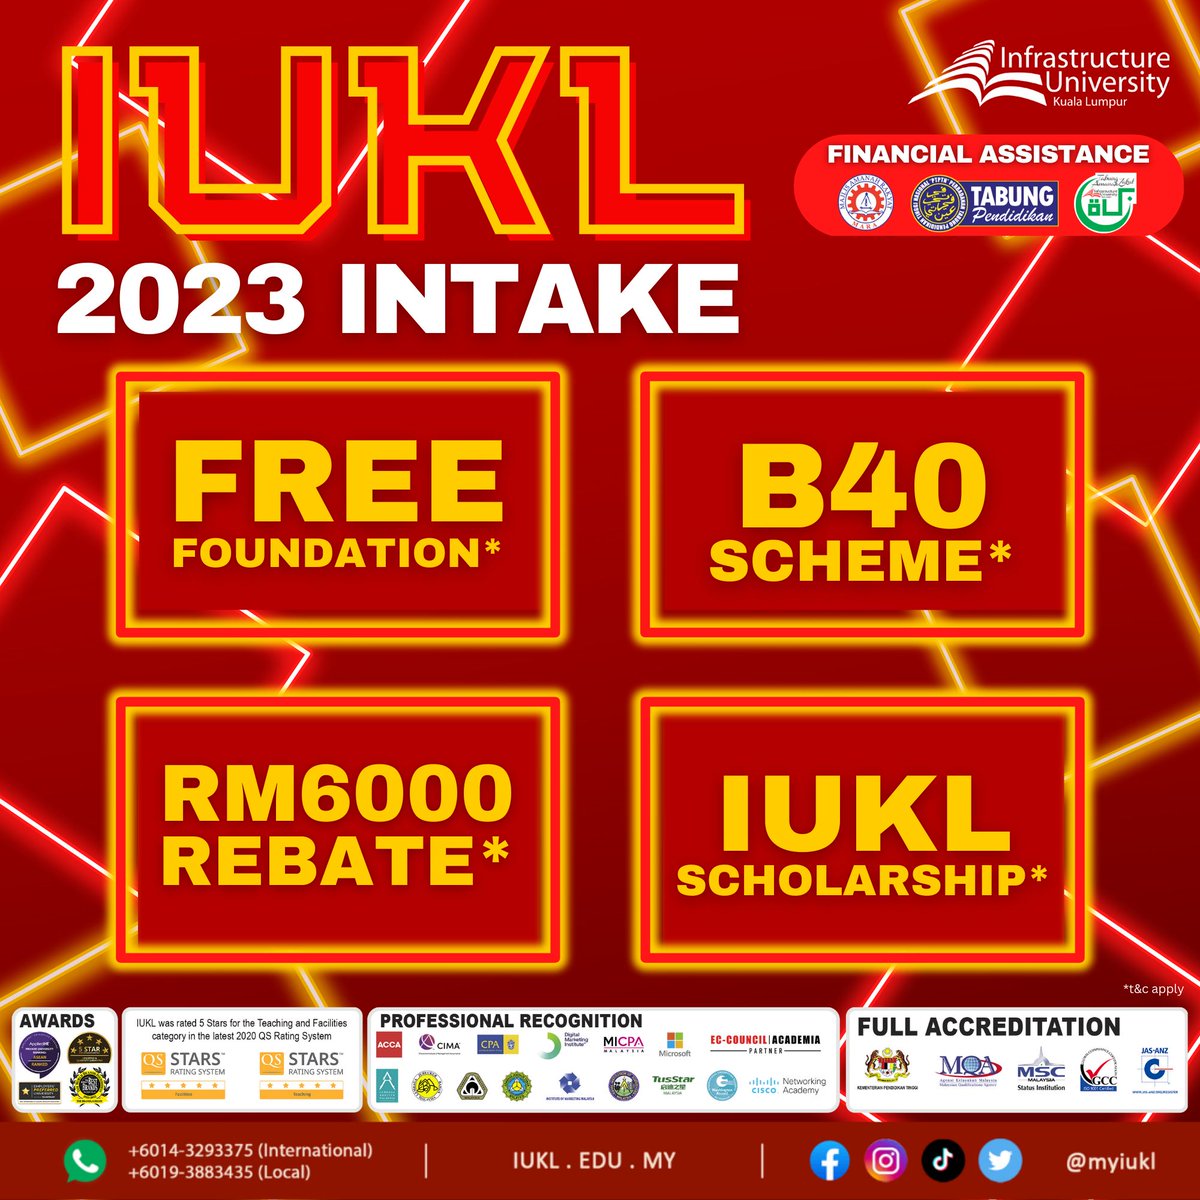 Hi! I'm here to remind you that the Infrastructure University Kuala Lumpur (IUKL) March 2023 intake registration is NOW OPEN!
We are offering you attractive promotions for 2023 intakes.

#myiukl #iuklcares #iukldares #myiukl #2023intake #march2023 #malaysiaeducation